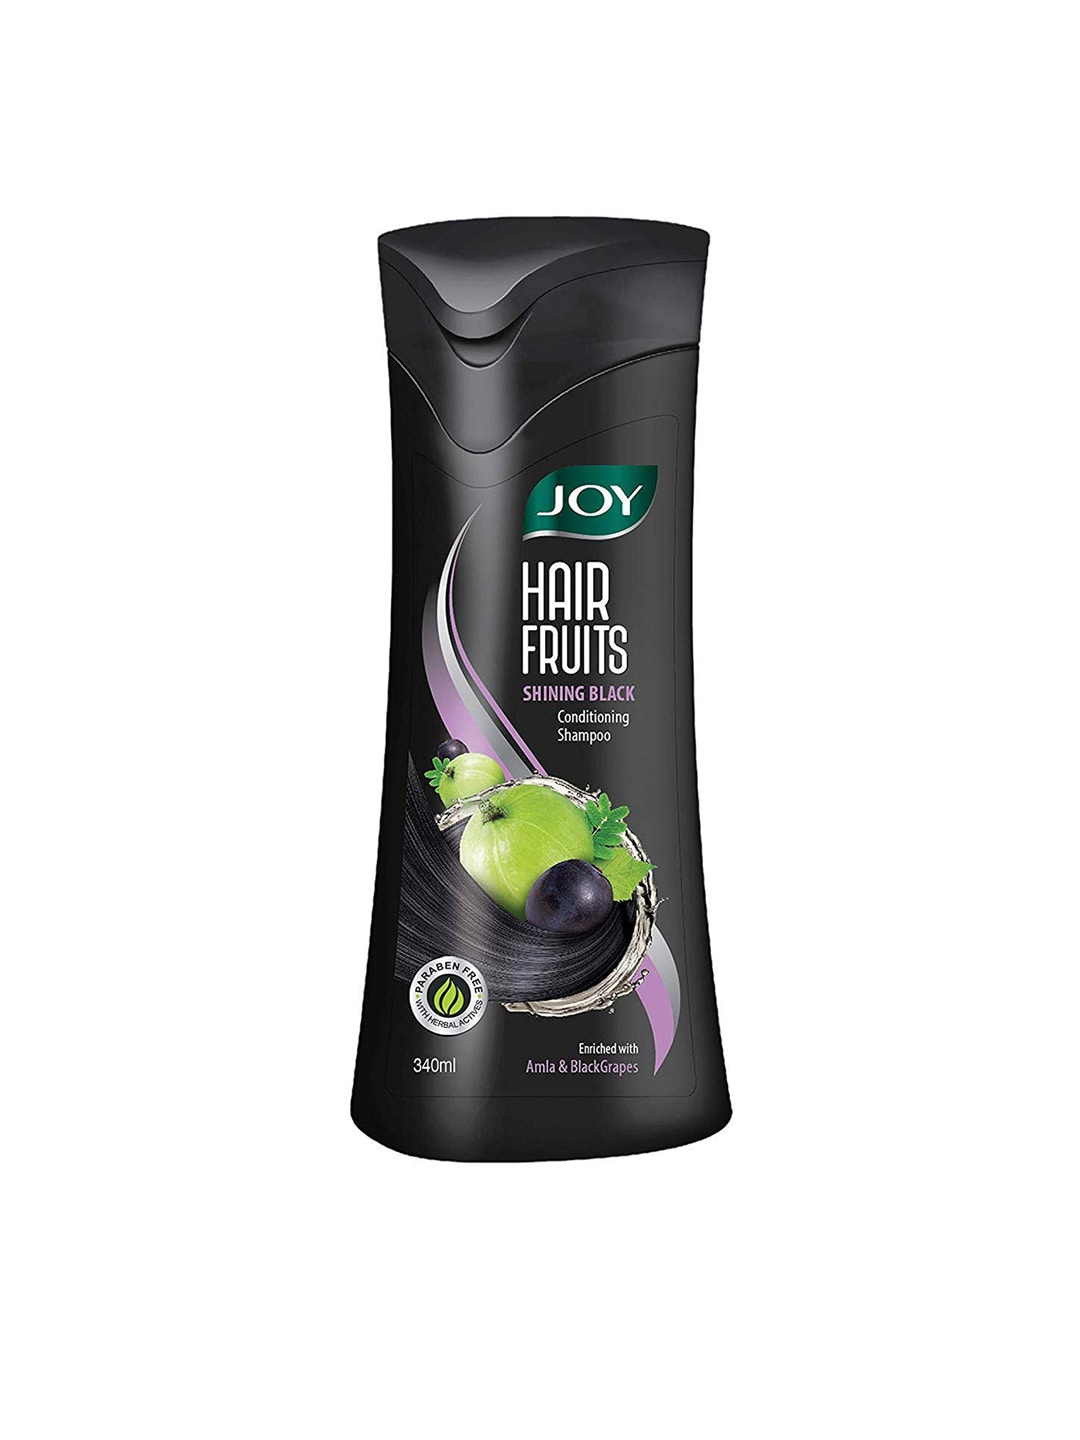 JOY Hair Fruits Shining Black Conditioning Shampoo with Amla & Black Grapes - 340 ml Price in India